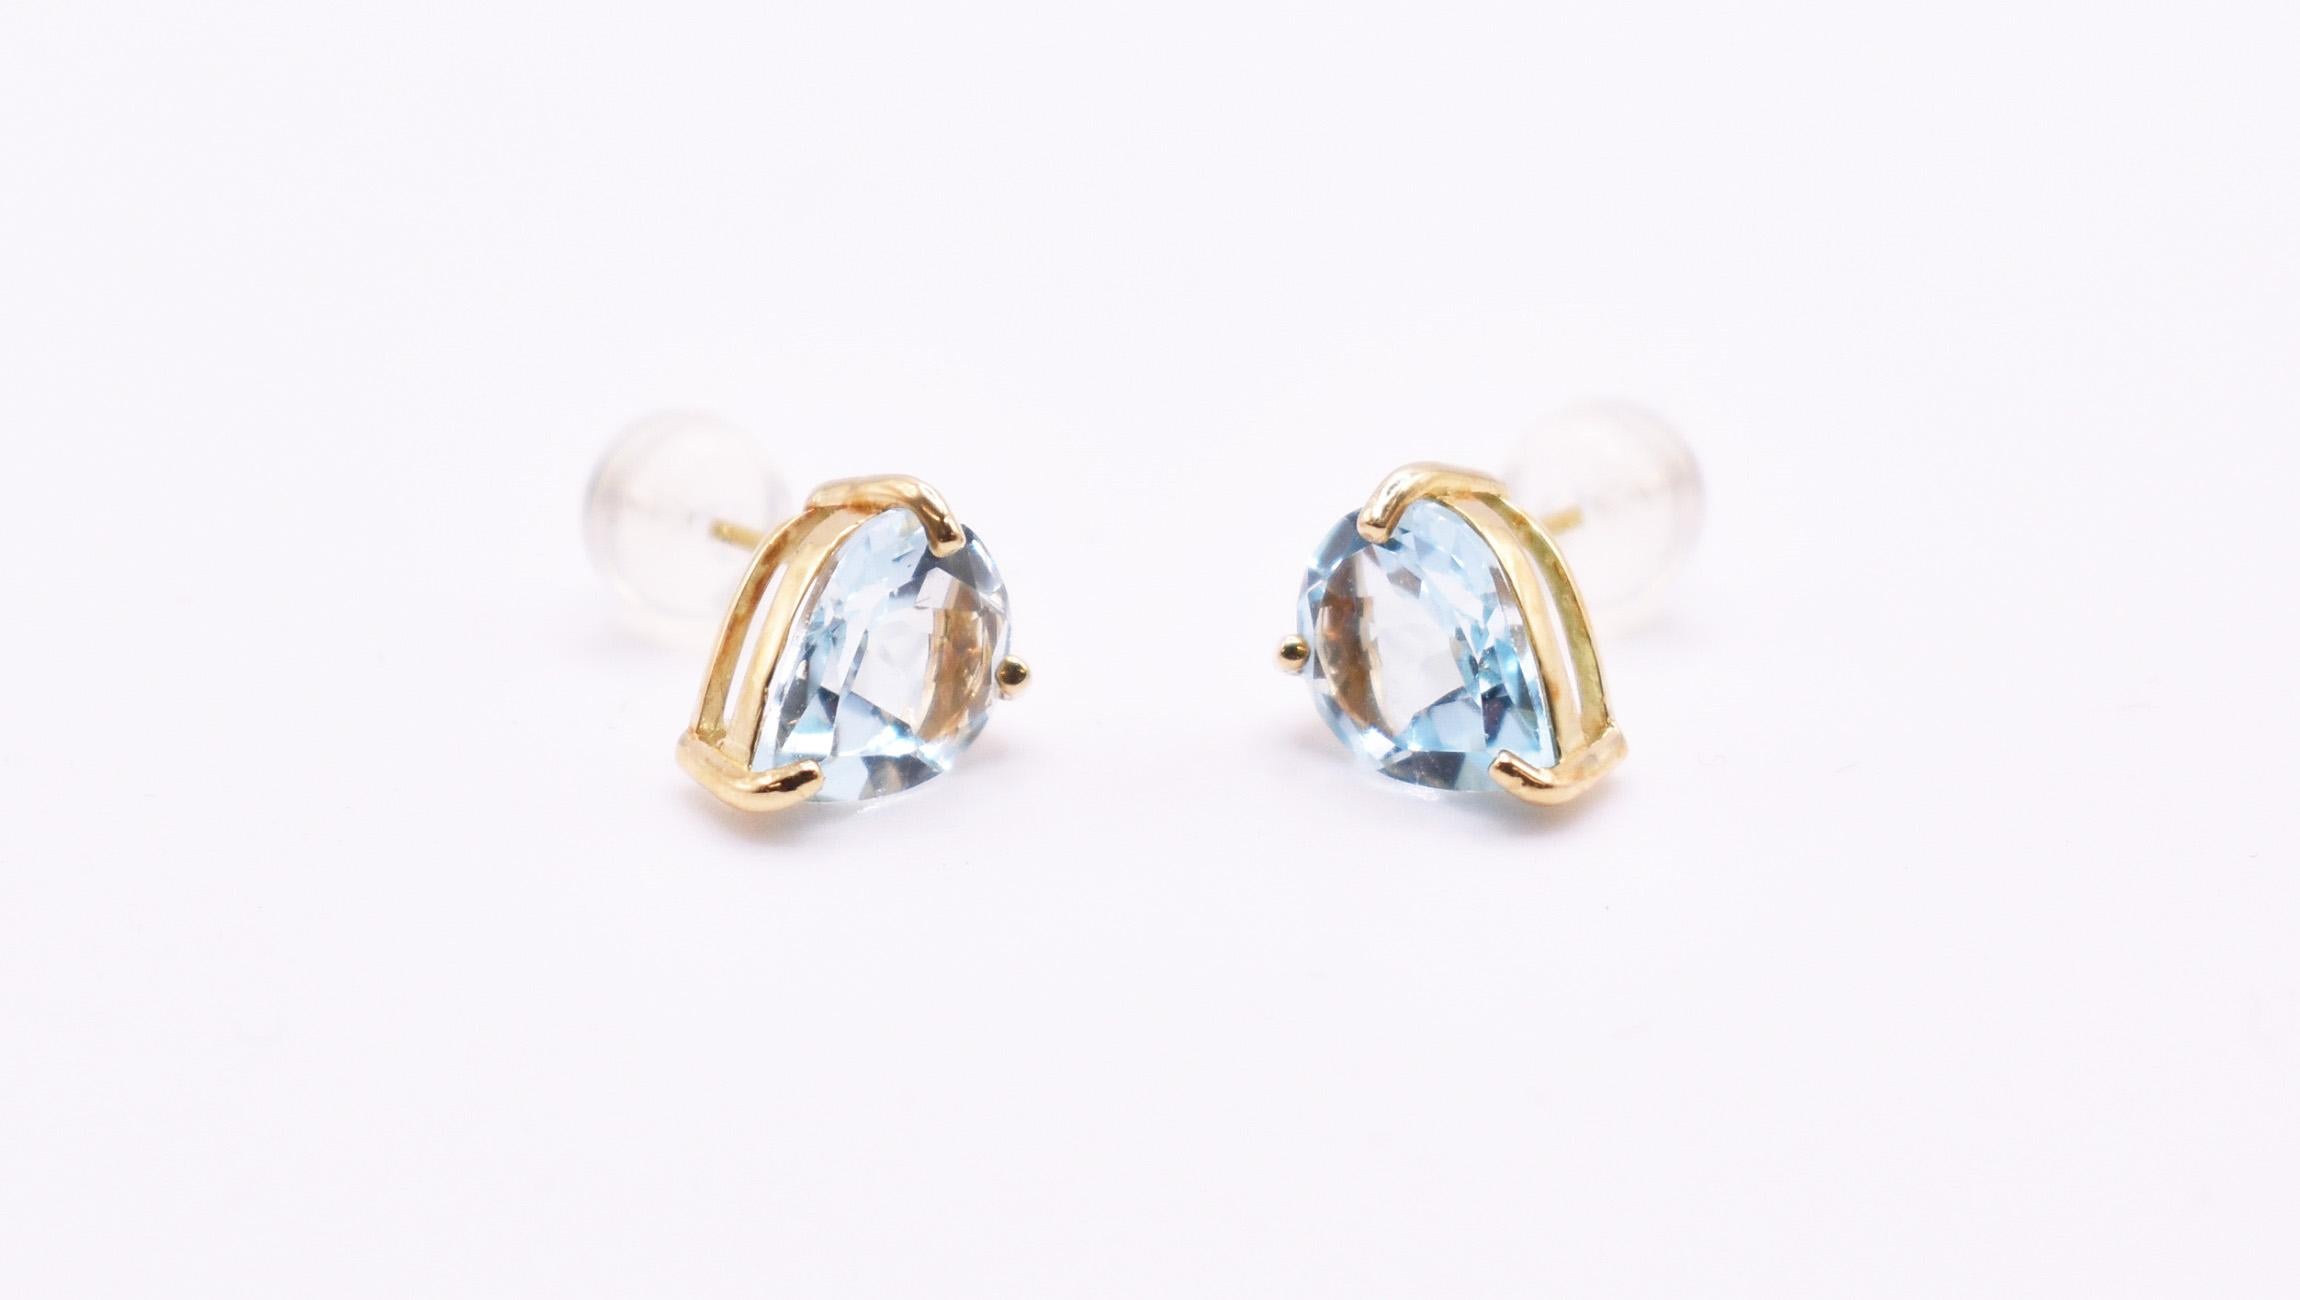 A wonderful pair of 18k yellow gold pearl cut topaz stud earrings. 

Topaz = 4.0ct Gold weight = 2.01g